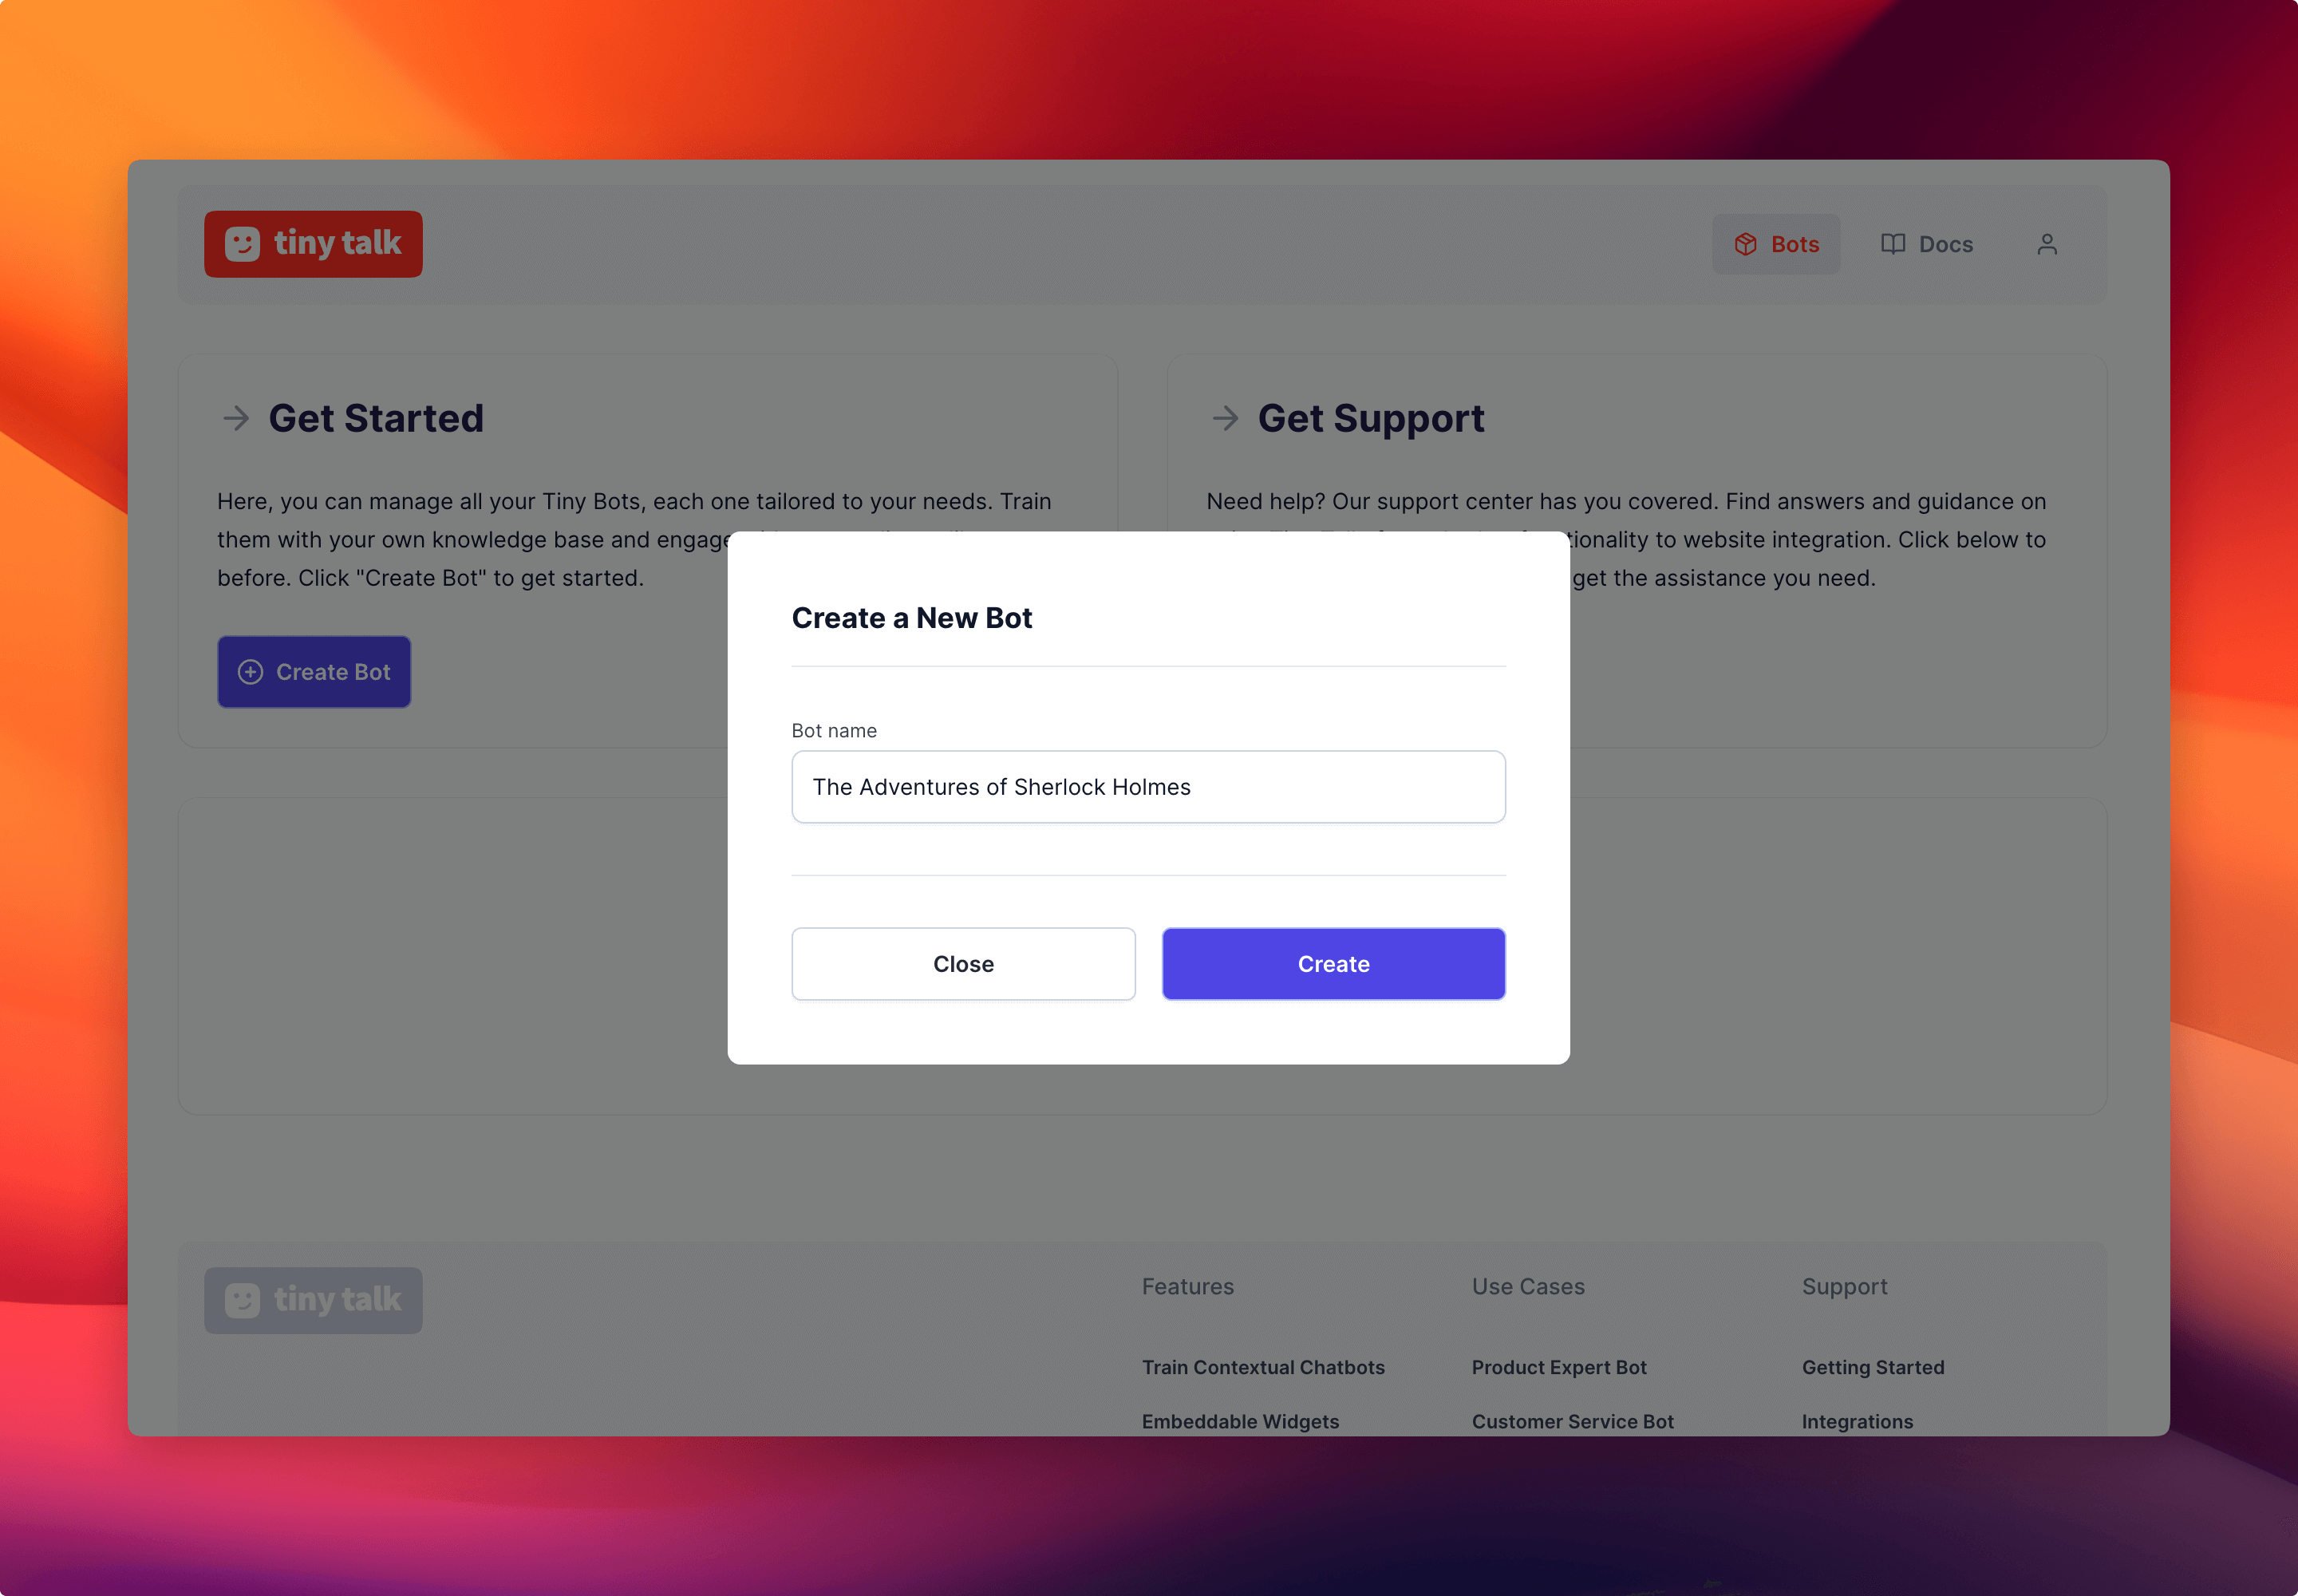 Once you login, you can create a new bot and give it a name